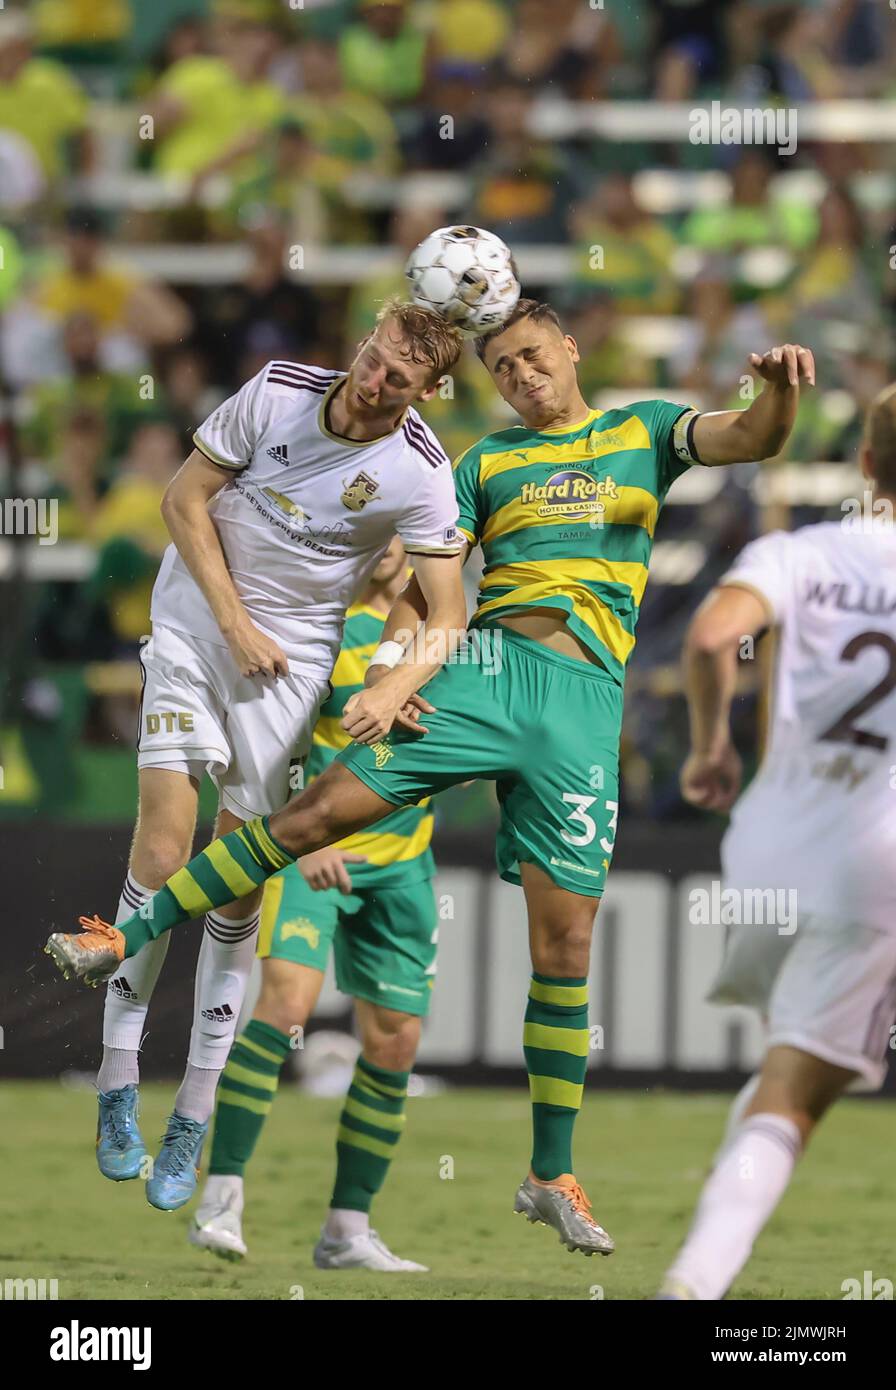 St. Petersburg, FL: Detroit City forward Connor Rutz (11) and Tampa Bay Rowdies defender Aaron Guillen (33) go up for a header during a USL soccer gam Stock Photo